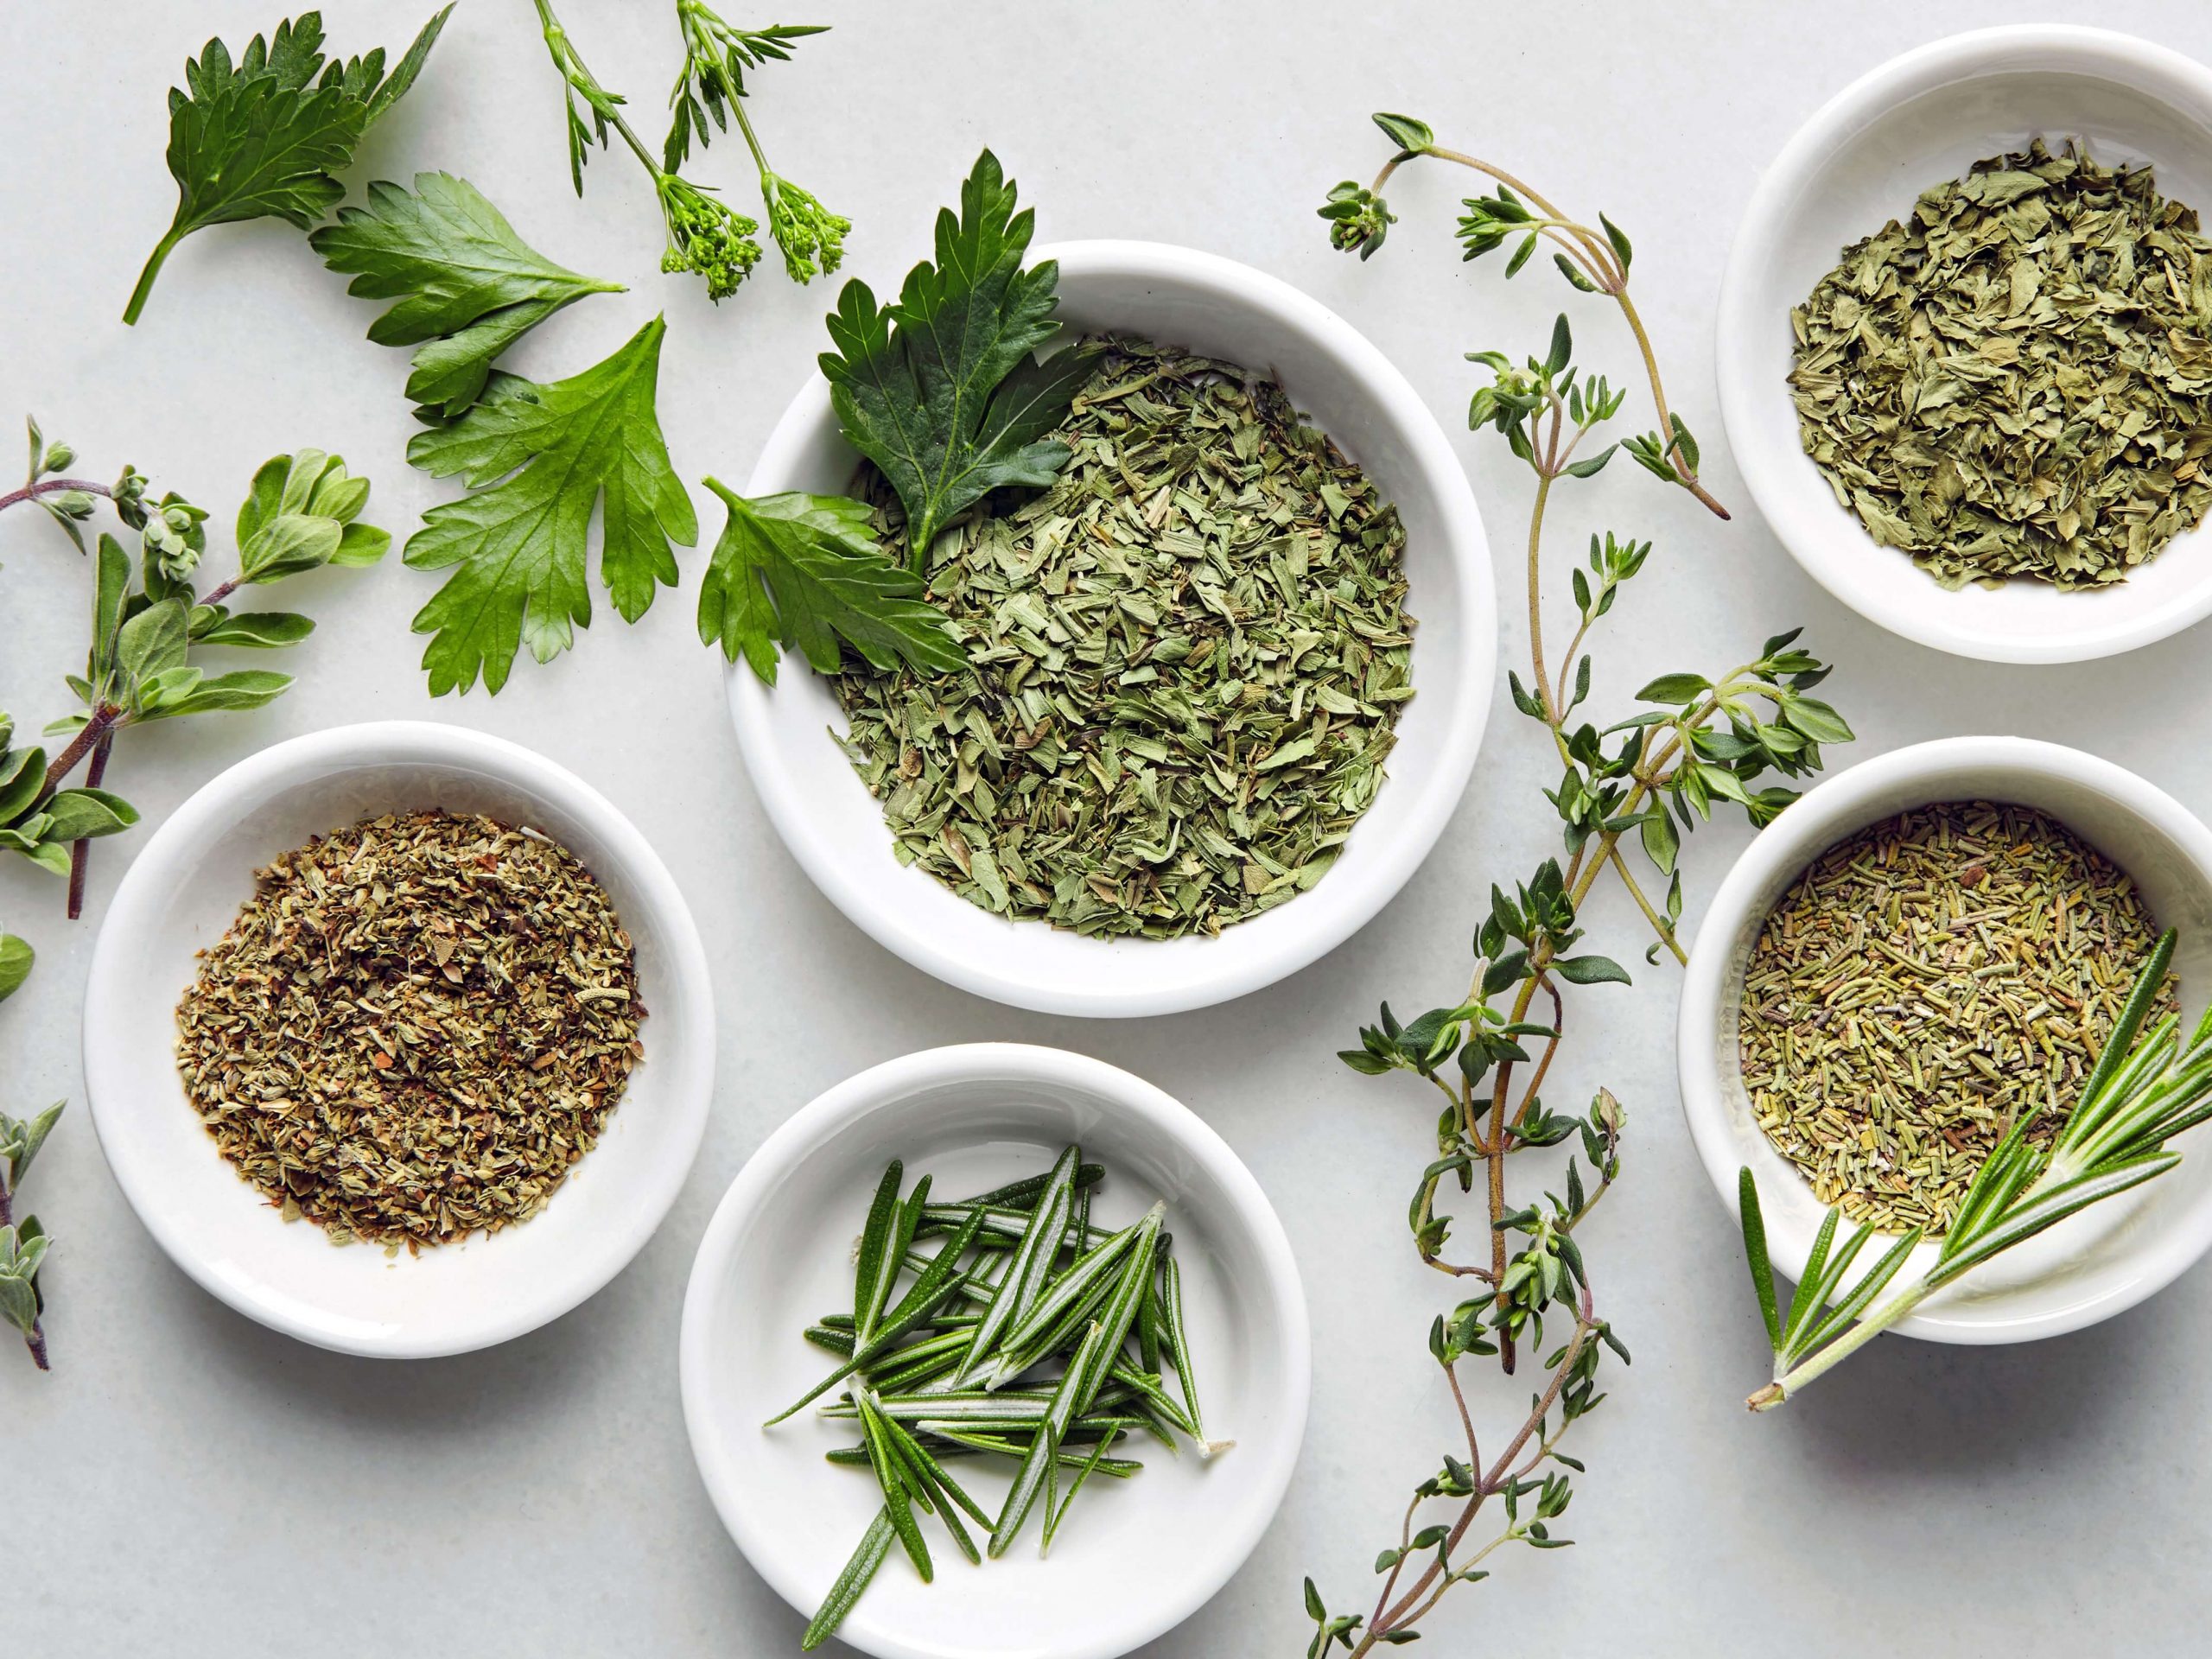 A selection of dried and fresh herbs